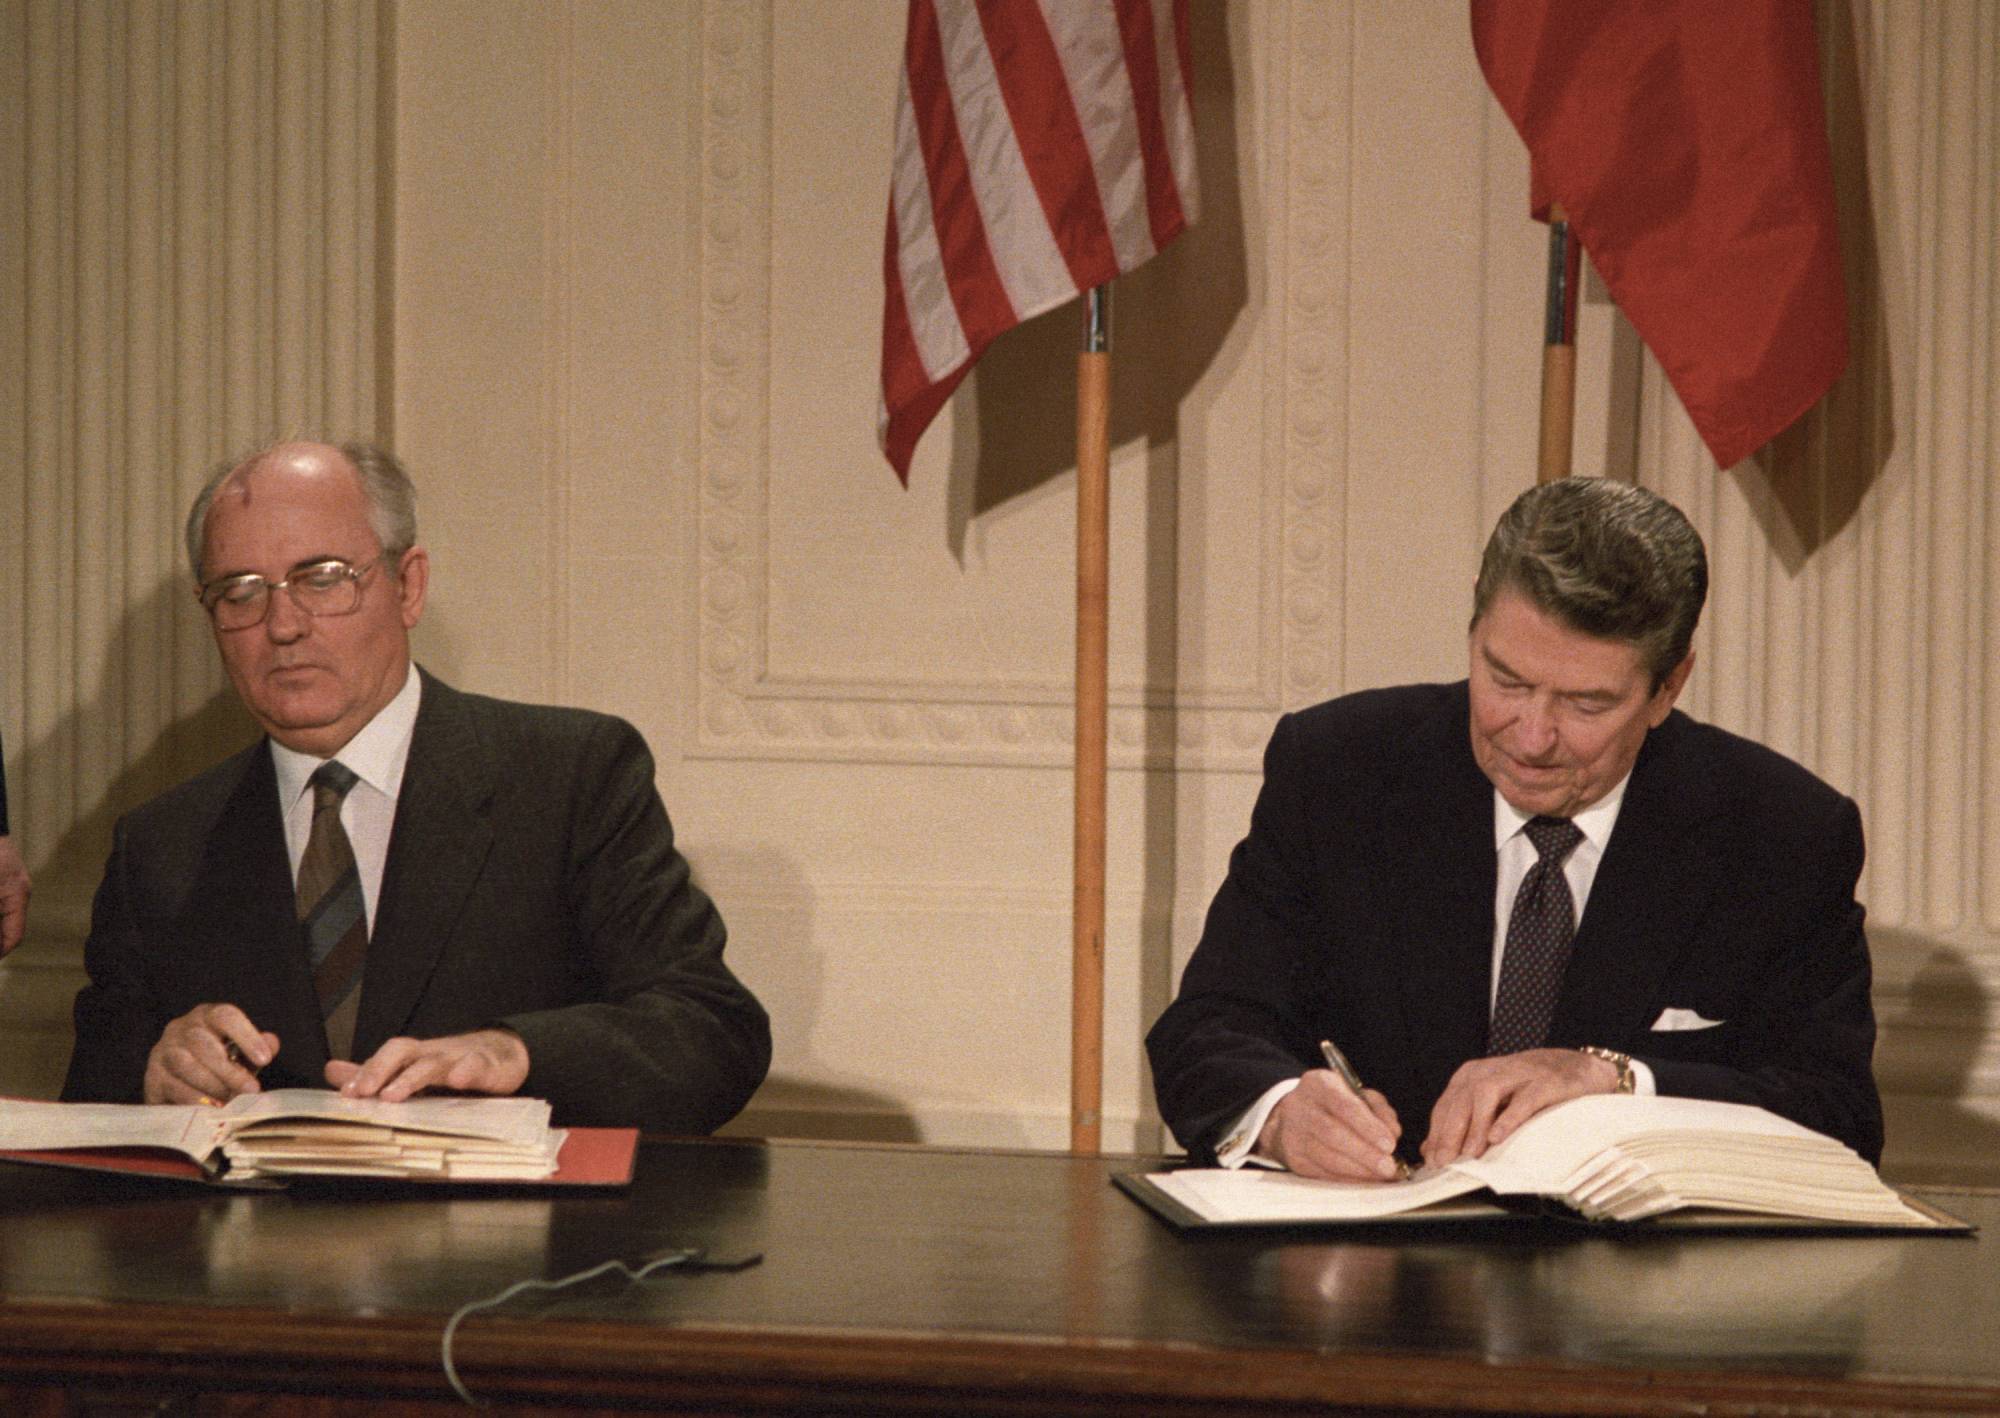 Mikhail Gorbachev’s Nuclear Legacy in Tatters